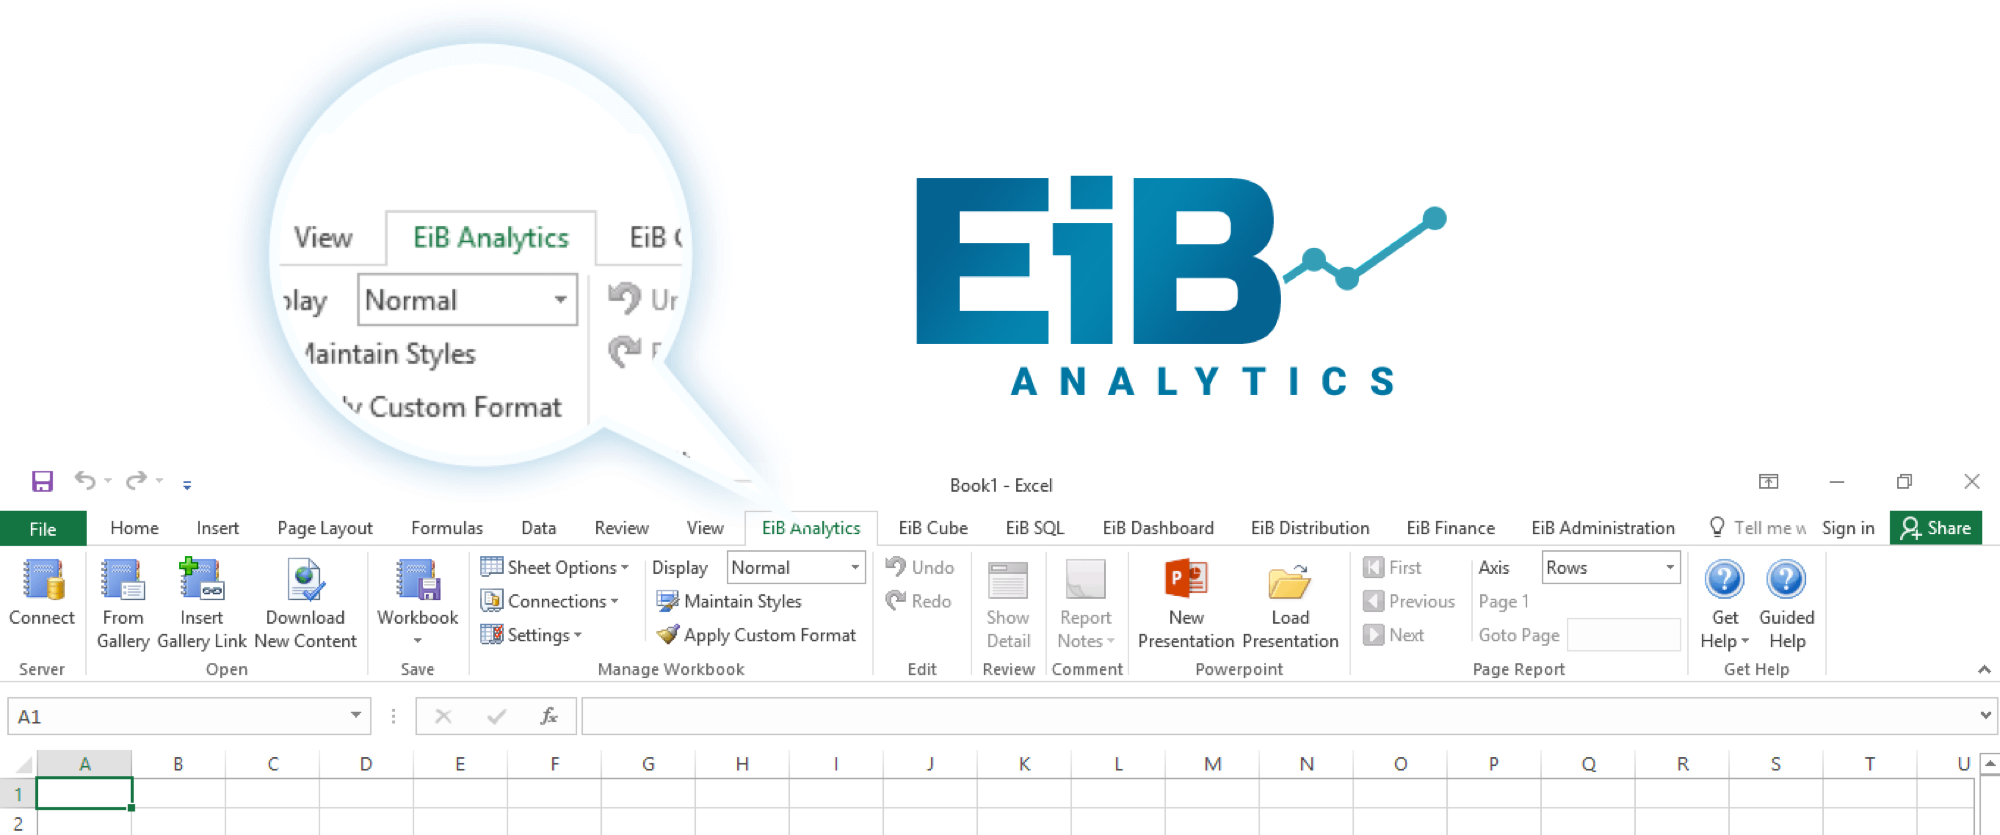 EiB All Accounting Systems Page -How It Works